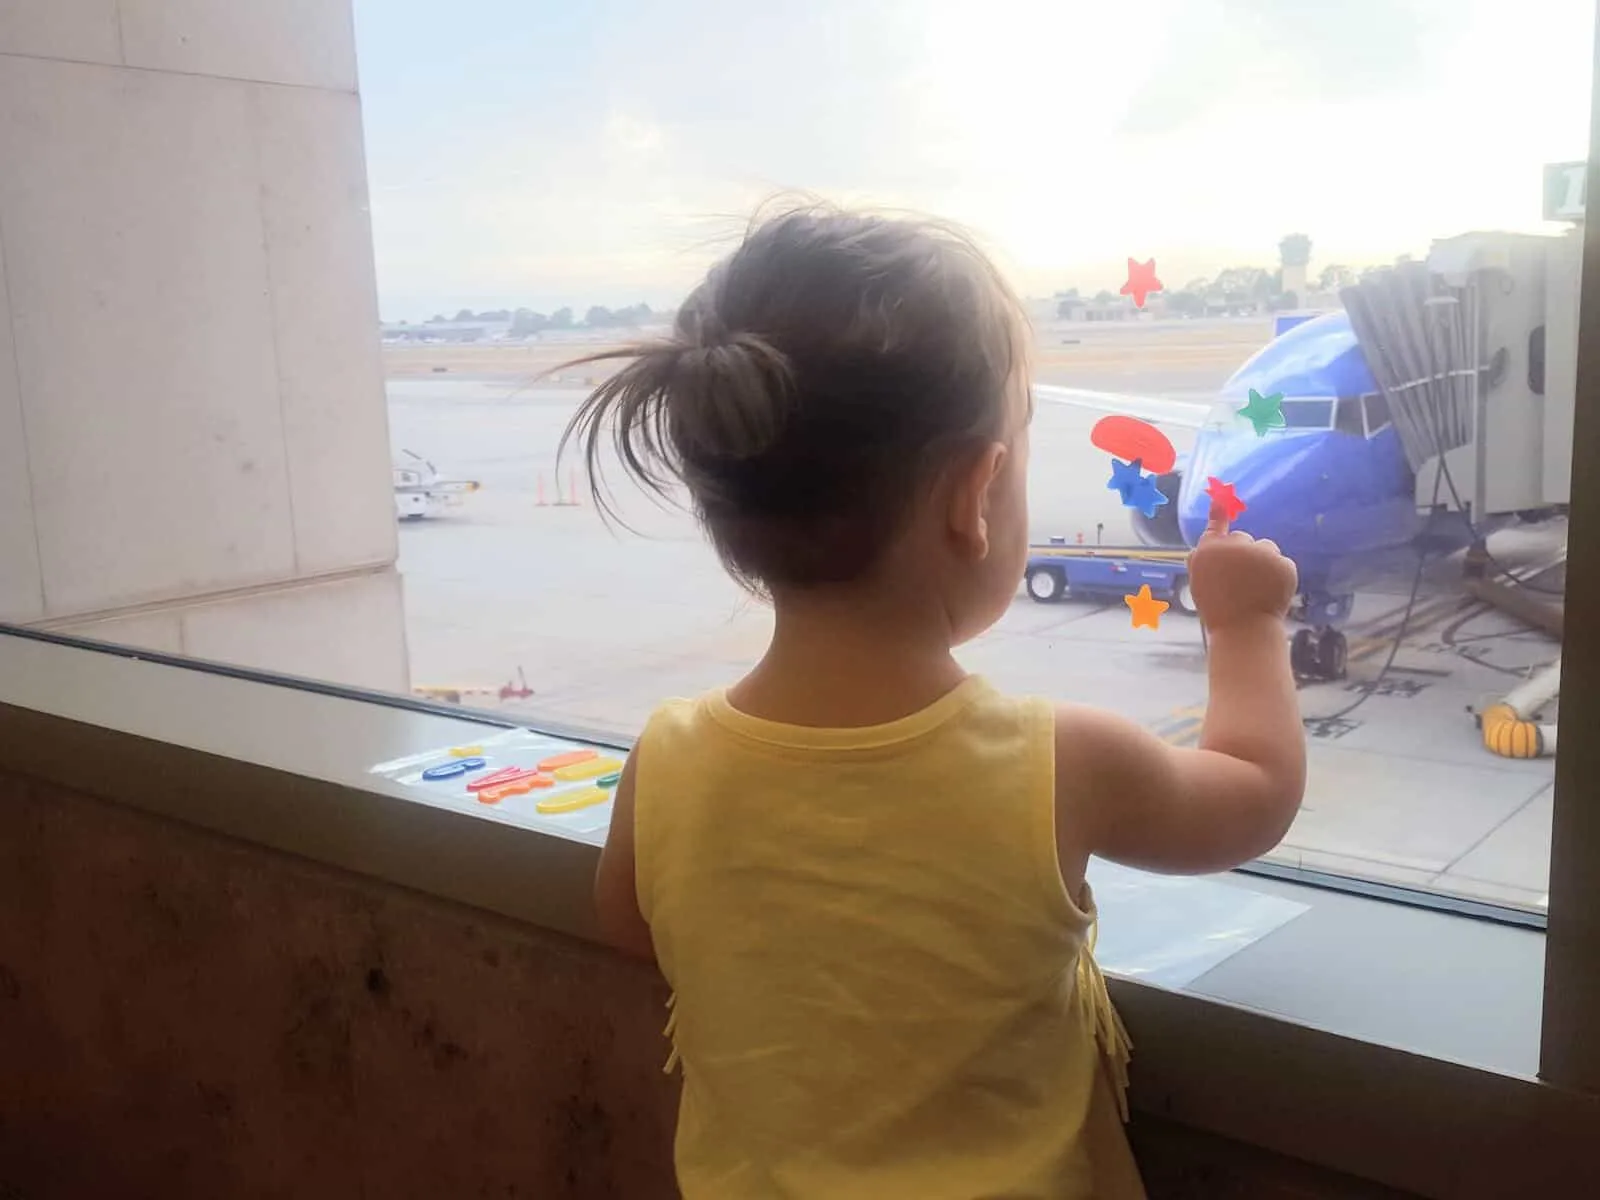 Toddler girl looks out of window at airport.